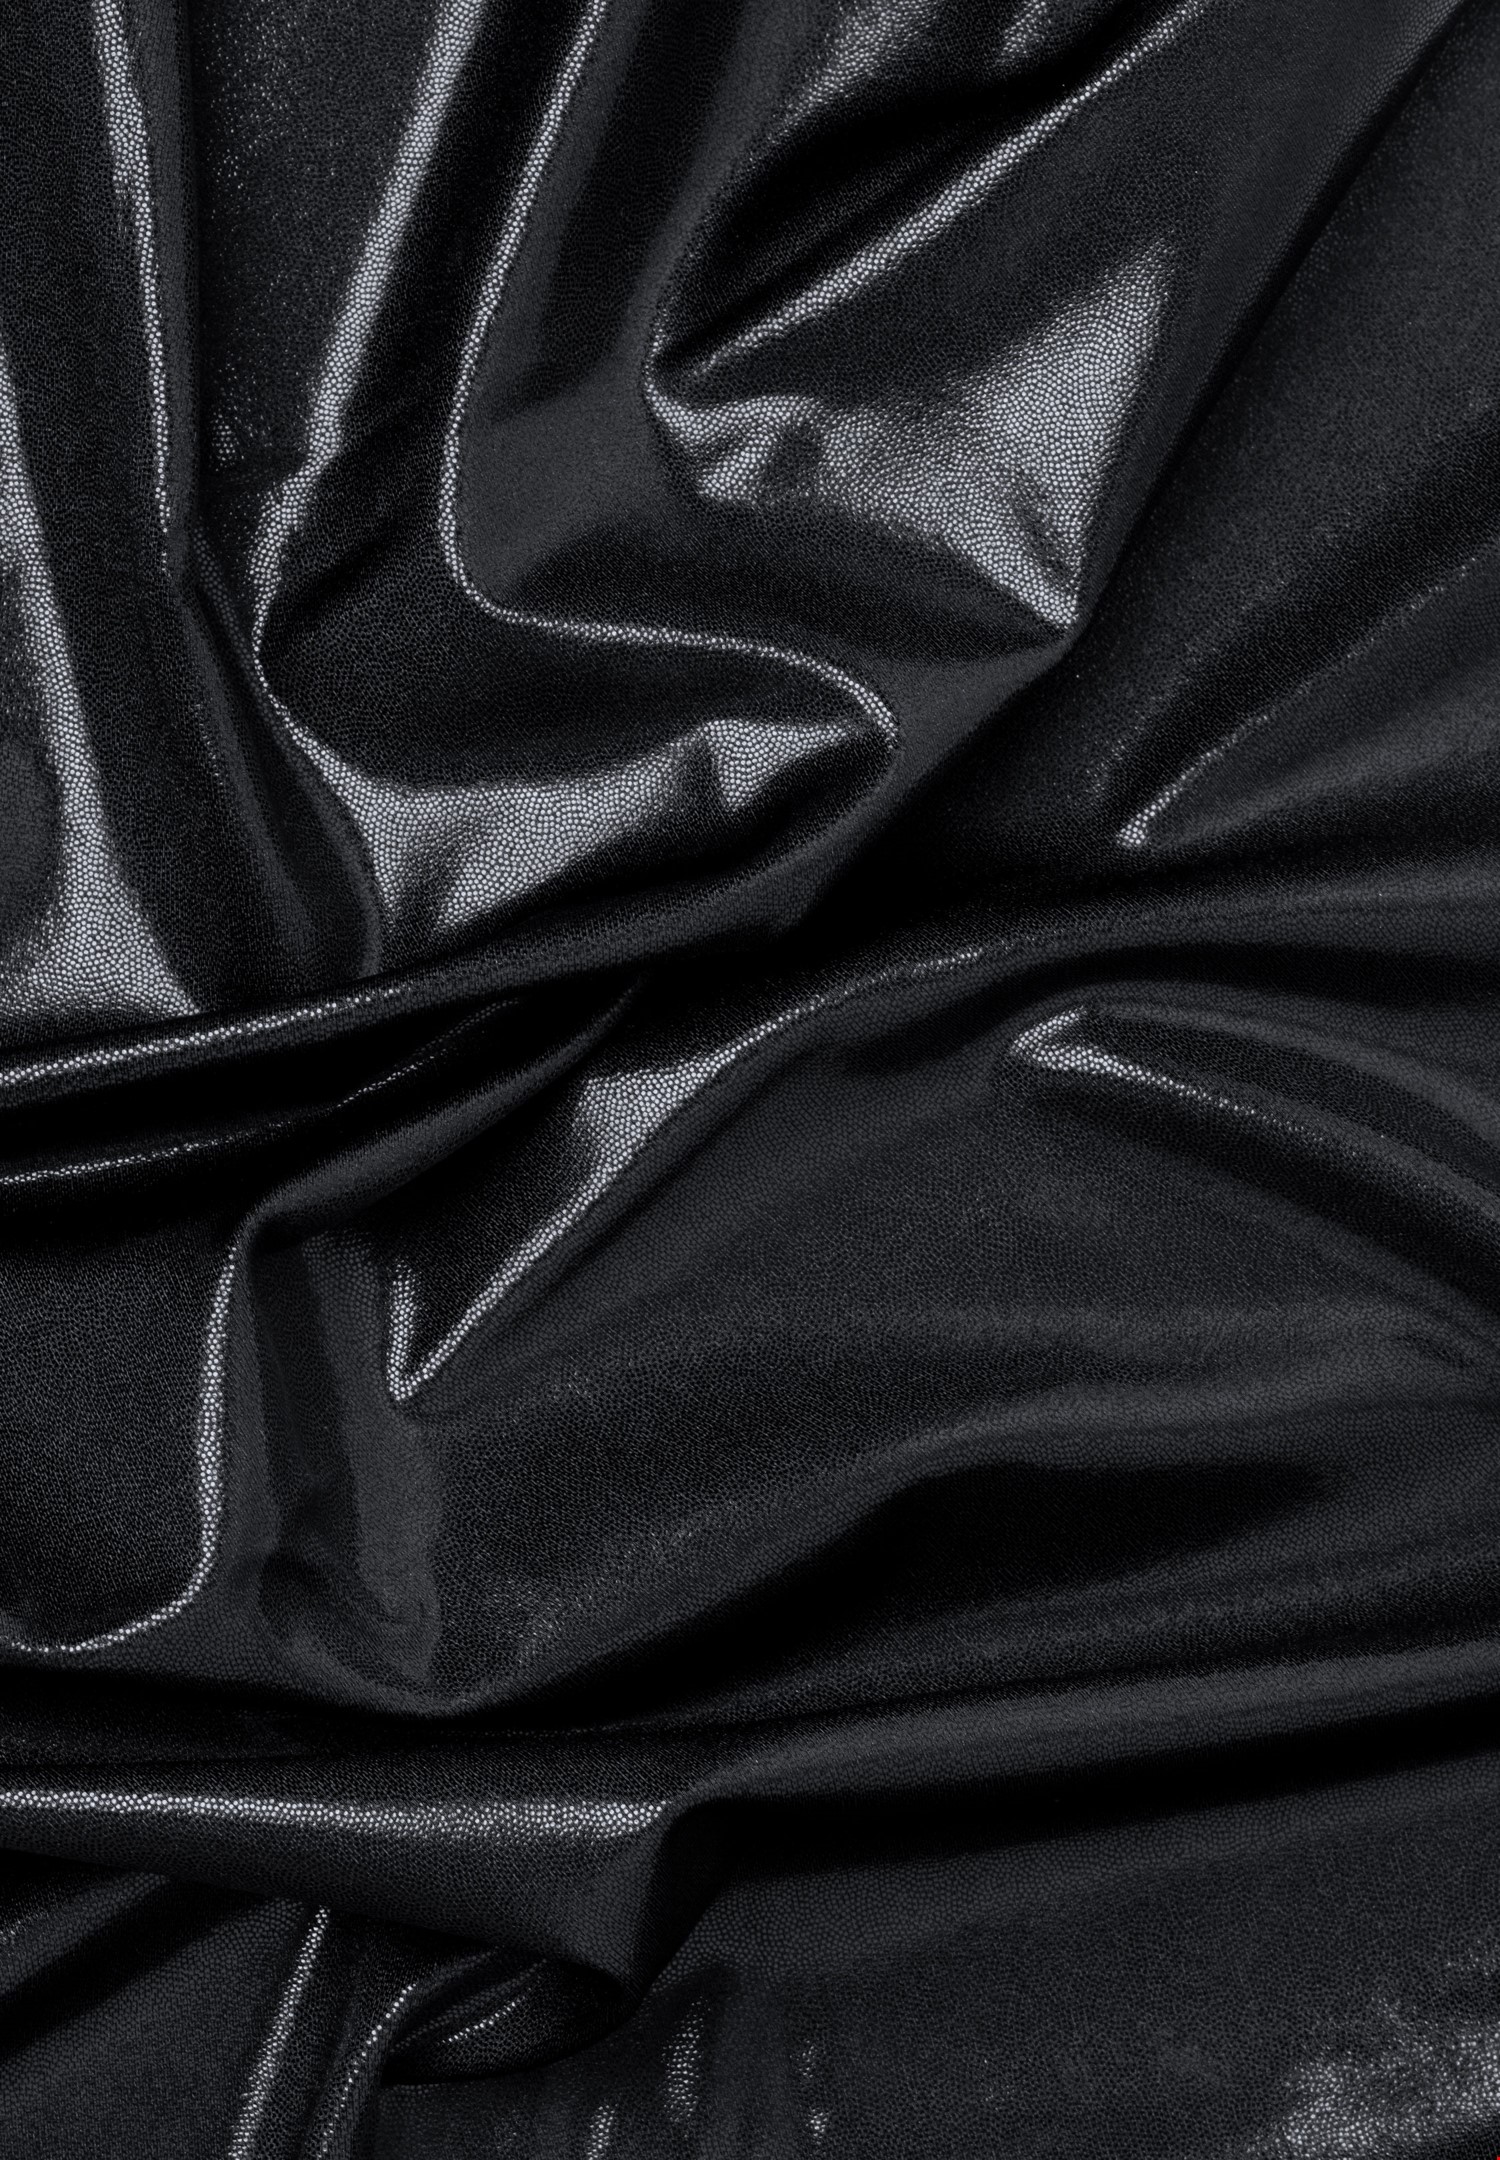 Black metal Lycra fabric per meter for the manufacture of costumes